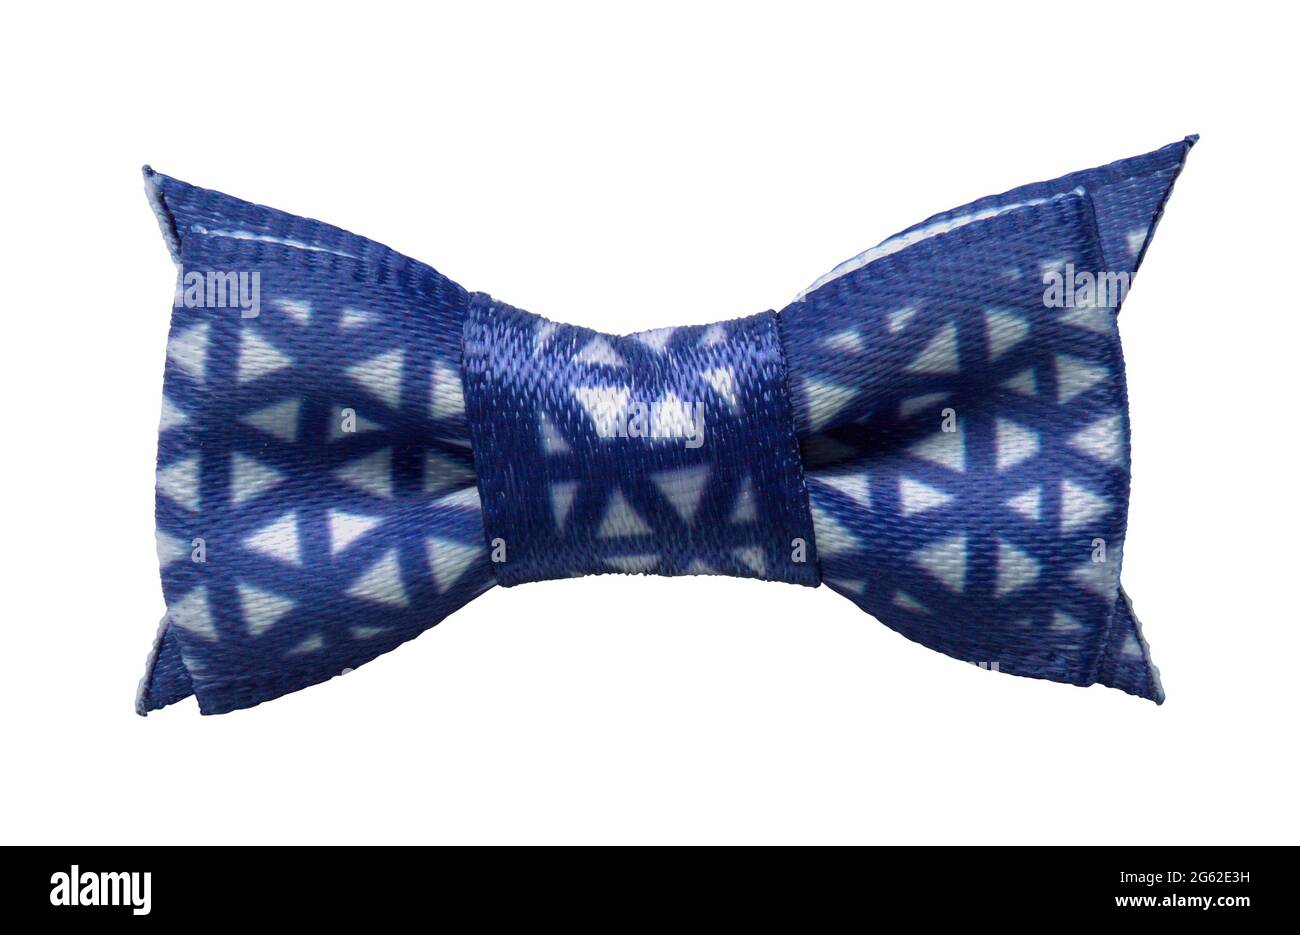 Blue Fabric Bow Tie Cut Out On White. Stock Photo